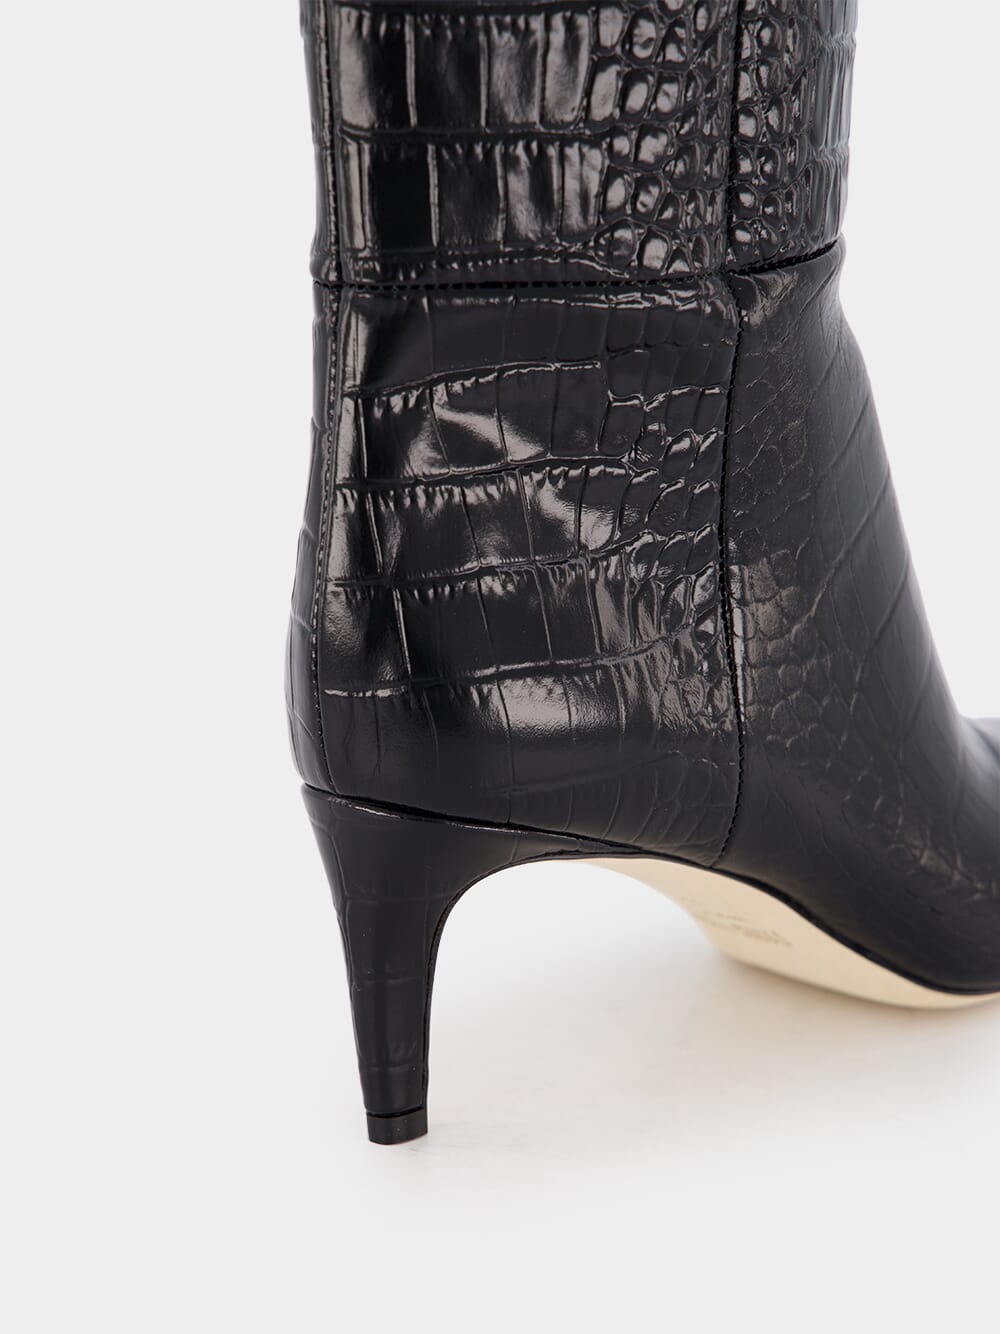 Paris TexasStiletto 60mm croc-effect leather knee boots at Fashion Clinic